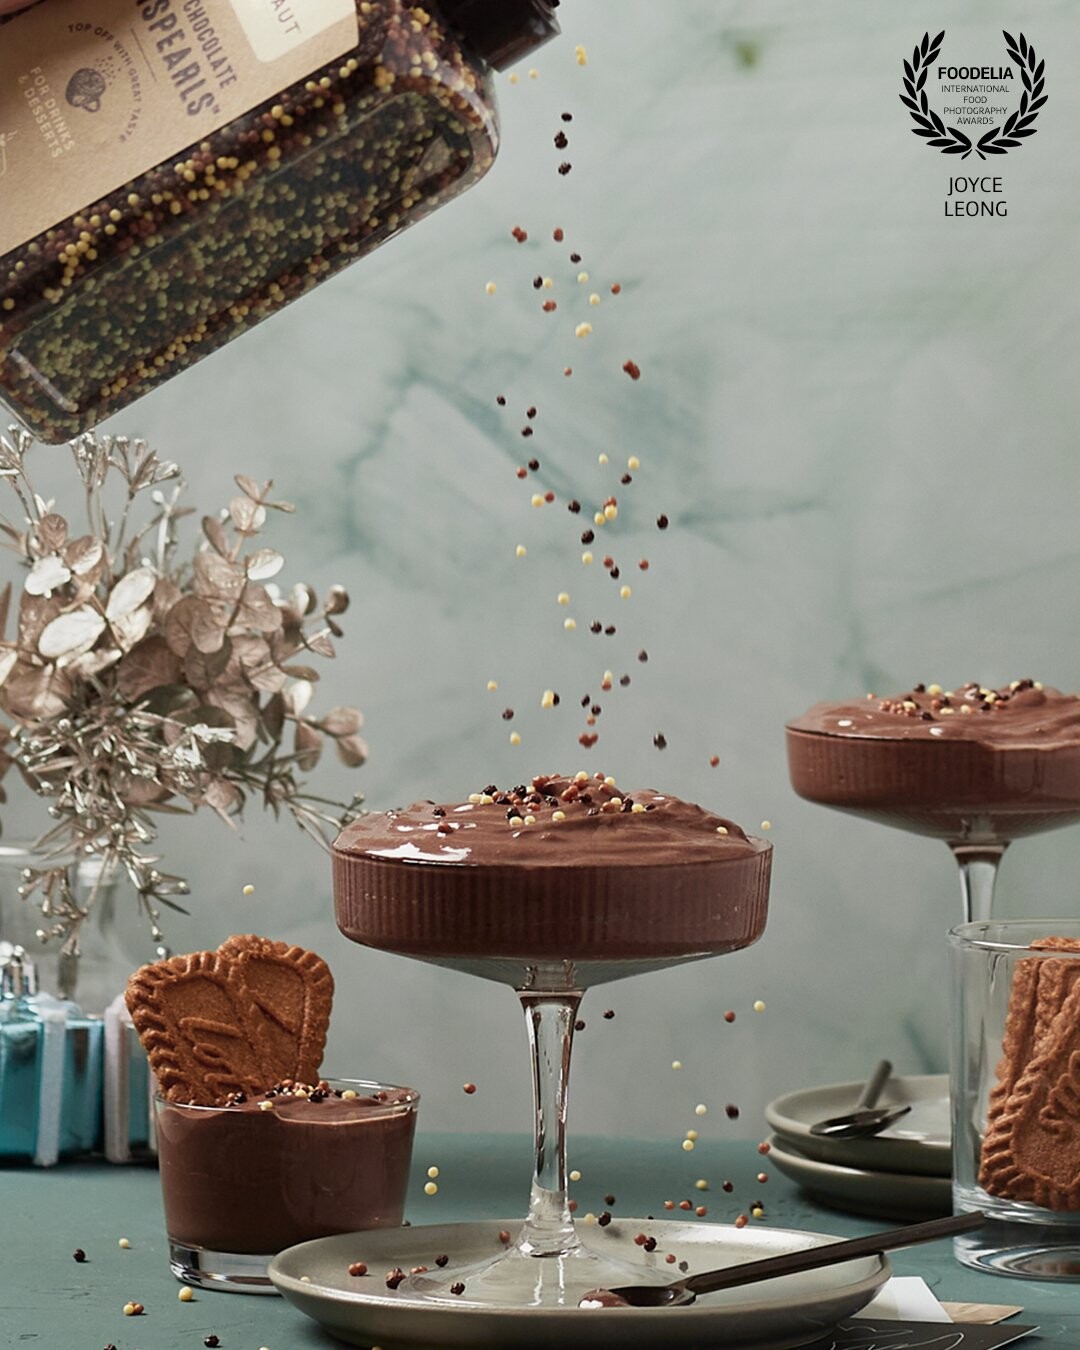 Created to showcase a familiar scene and focused on the contrast between the soft, calm green tones and the energy of the falling chocolate crispearls.